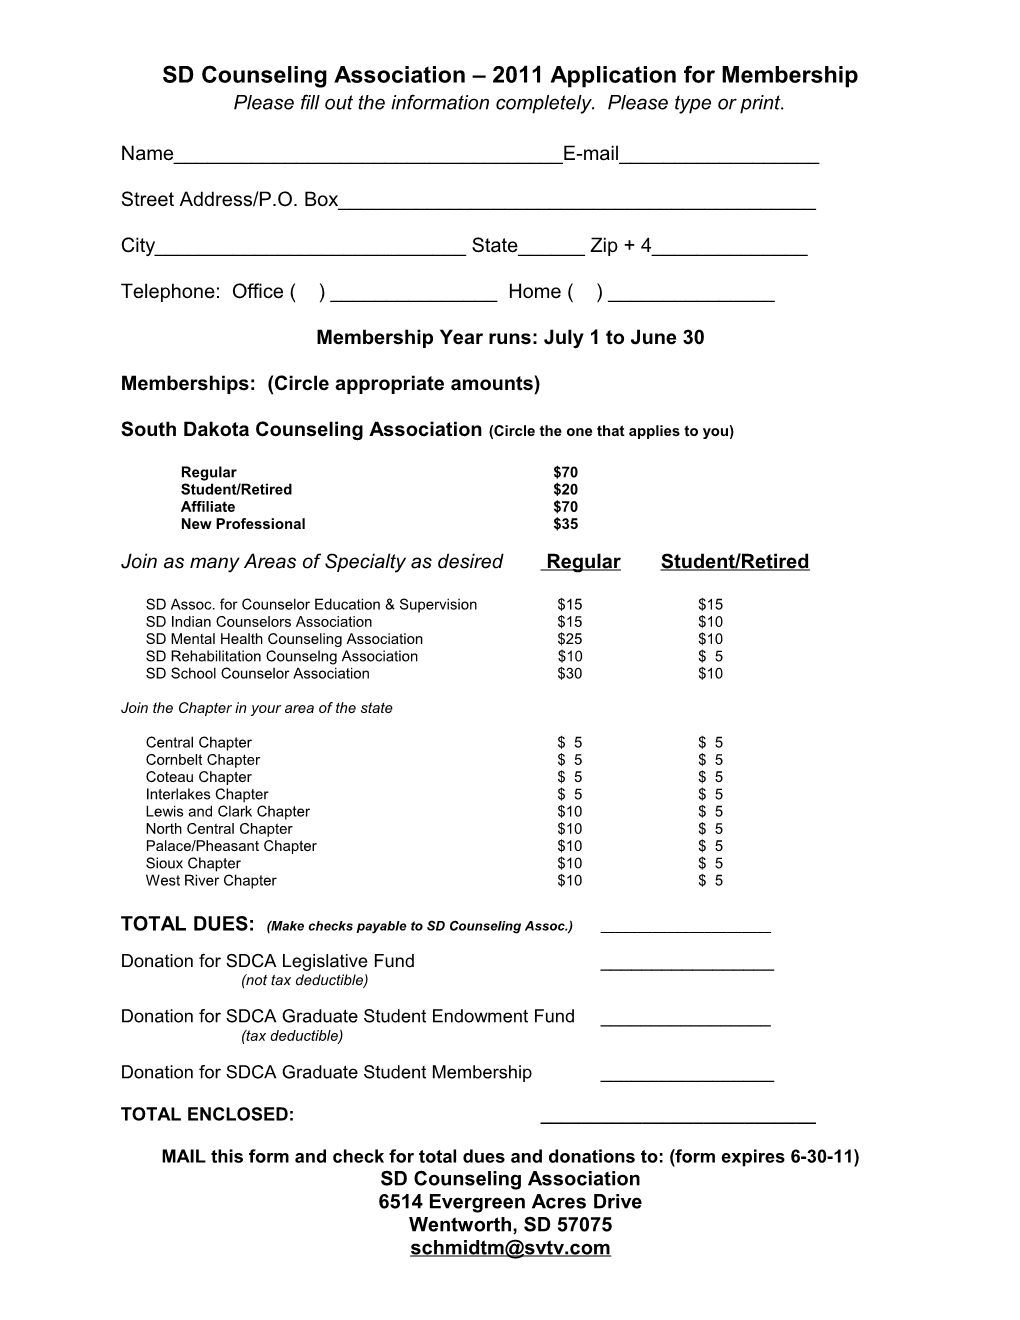 SD Counseling Association - Application for Membership